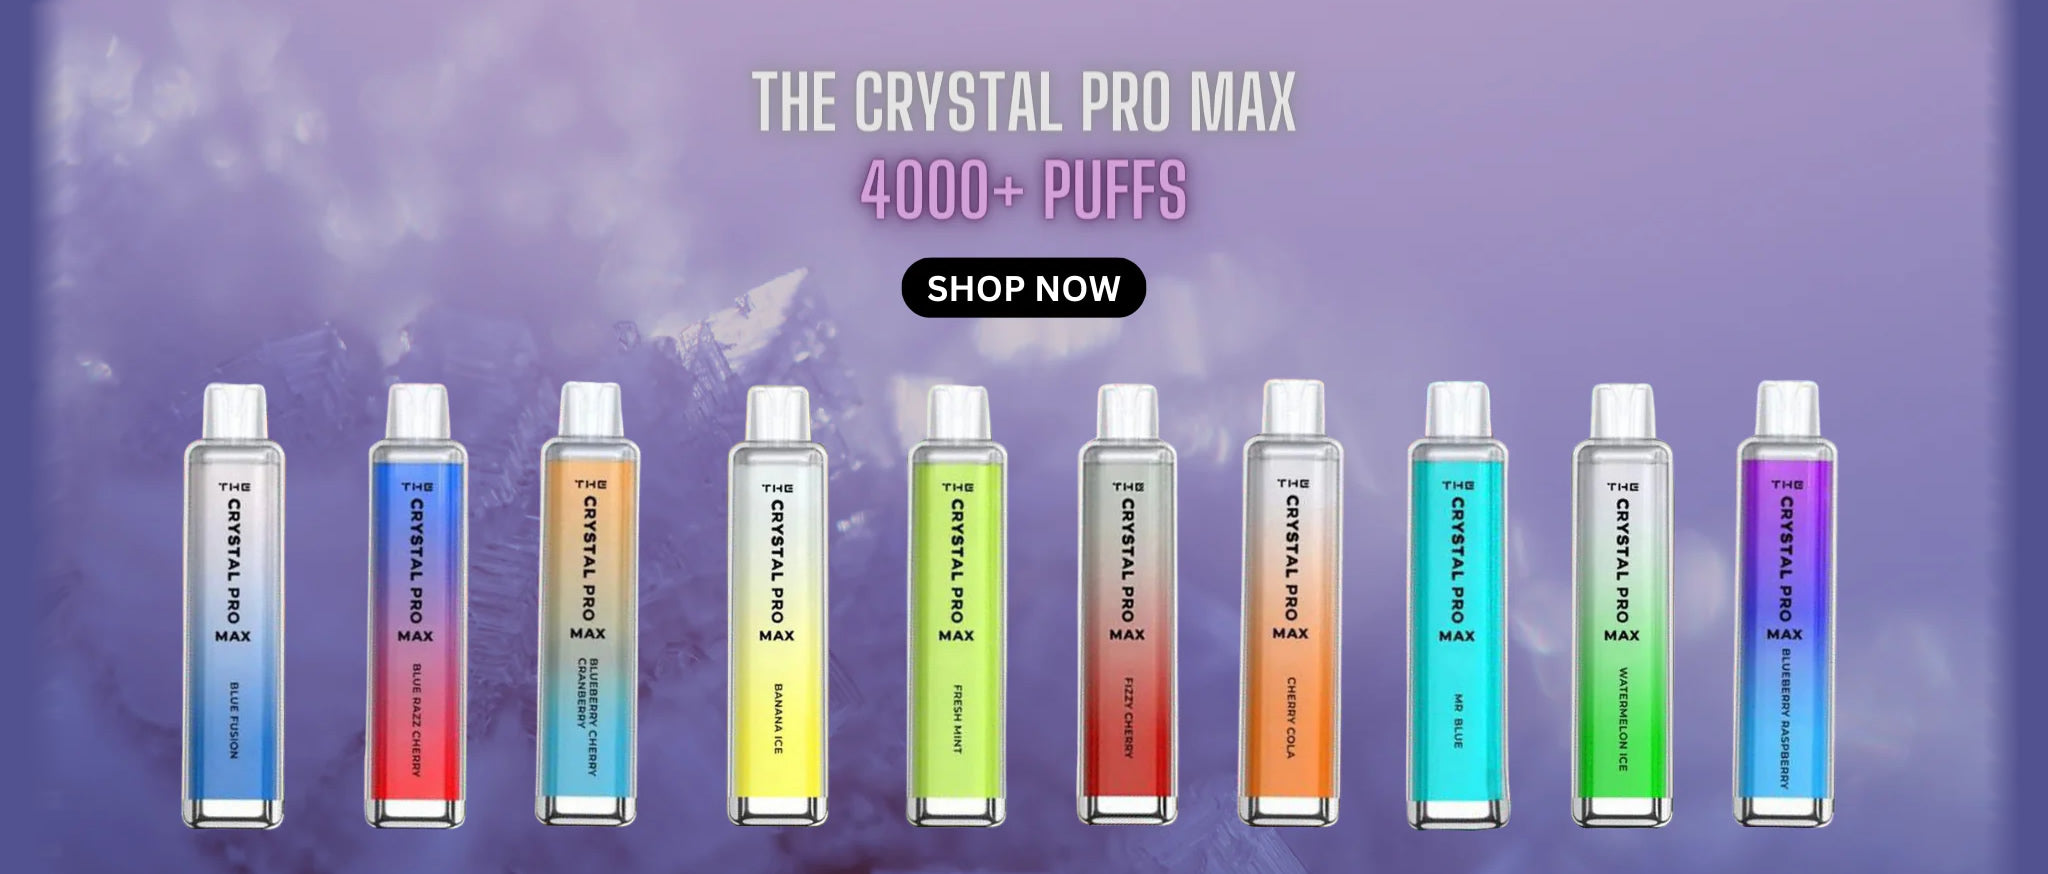 The Crystal Pro Max Vape Banner